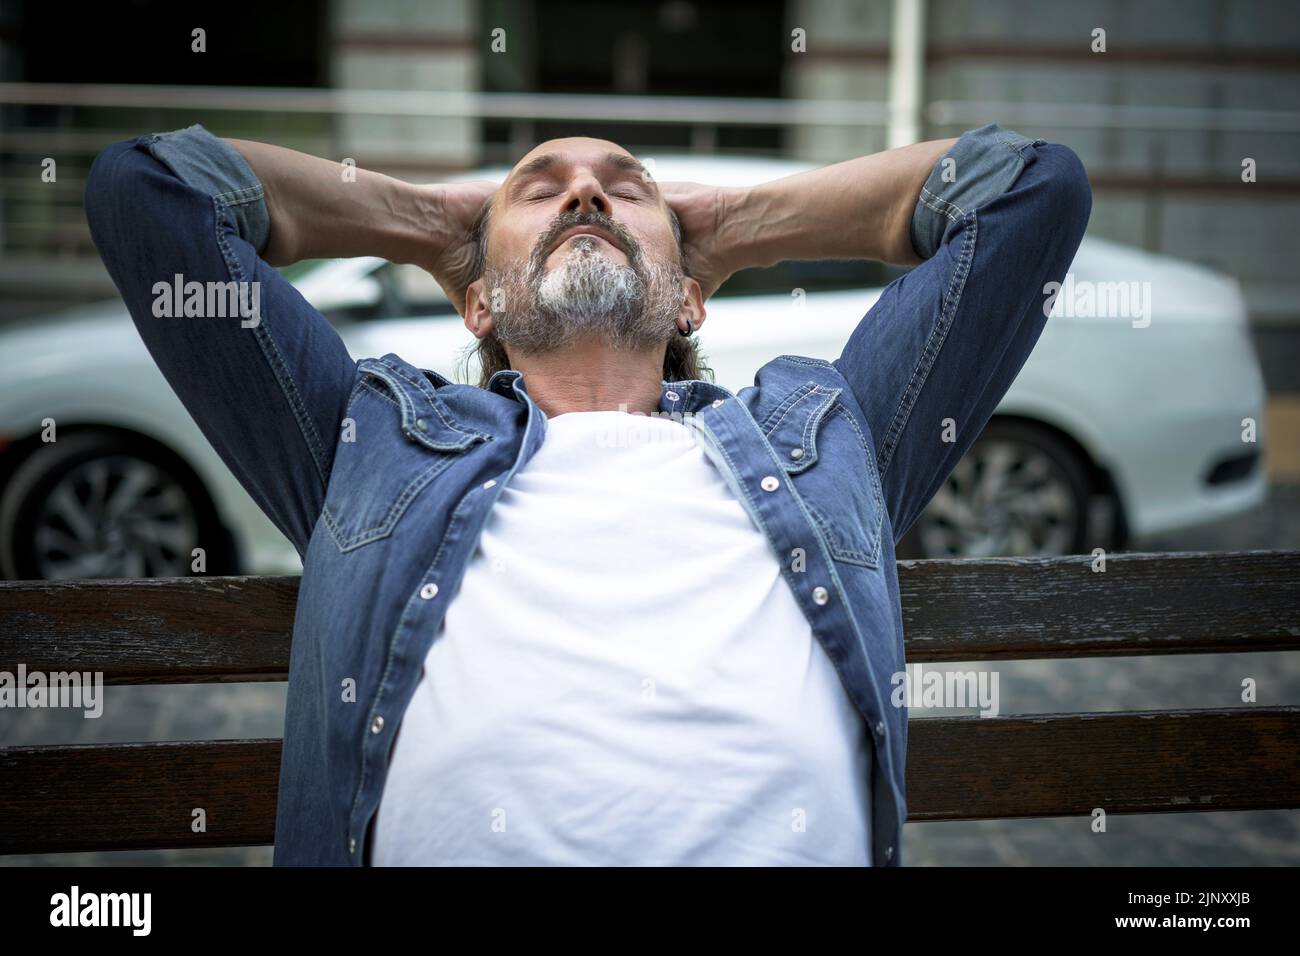 Relaxed, enjoying life handsome middle age man sits leaned back with hands behind his head on the bench outdoors at urban city background wearing denim shirt and white t-shirt. Travel concept.  Stock Photo